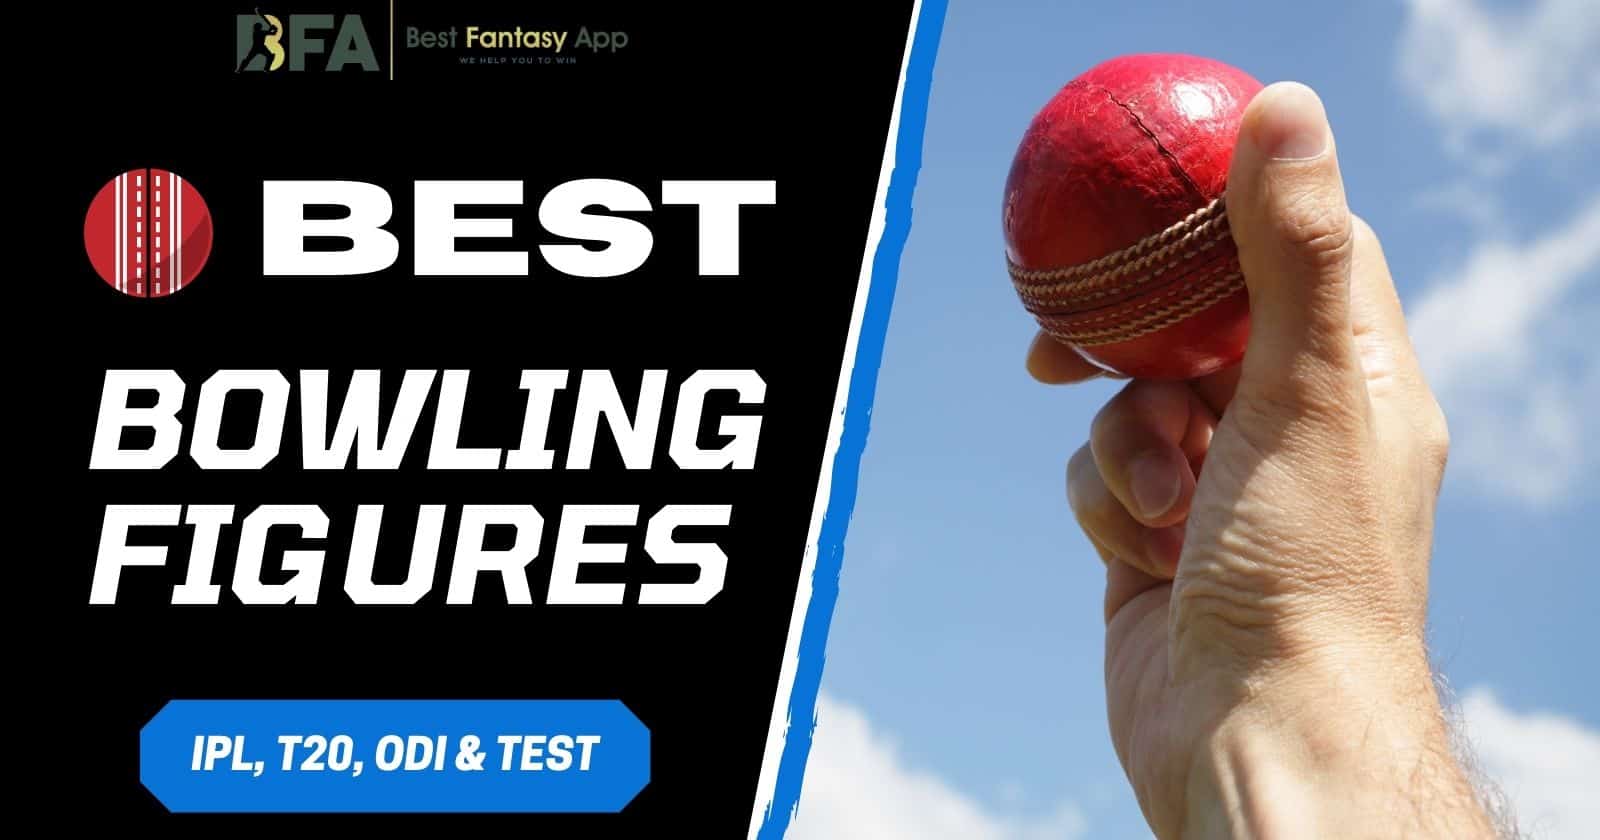 Who holds the record for best bowling figures in IPL, T20, ODI & Test Match?